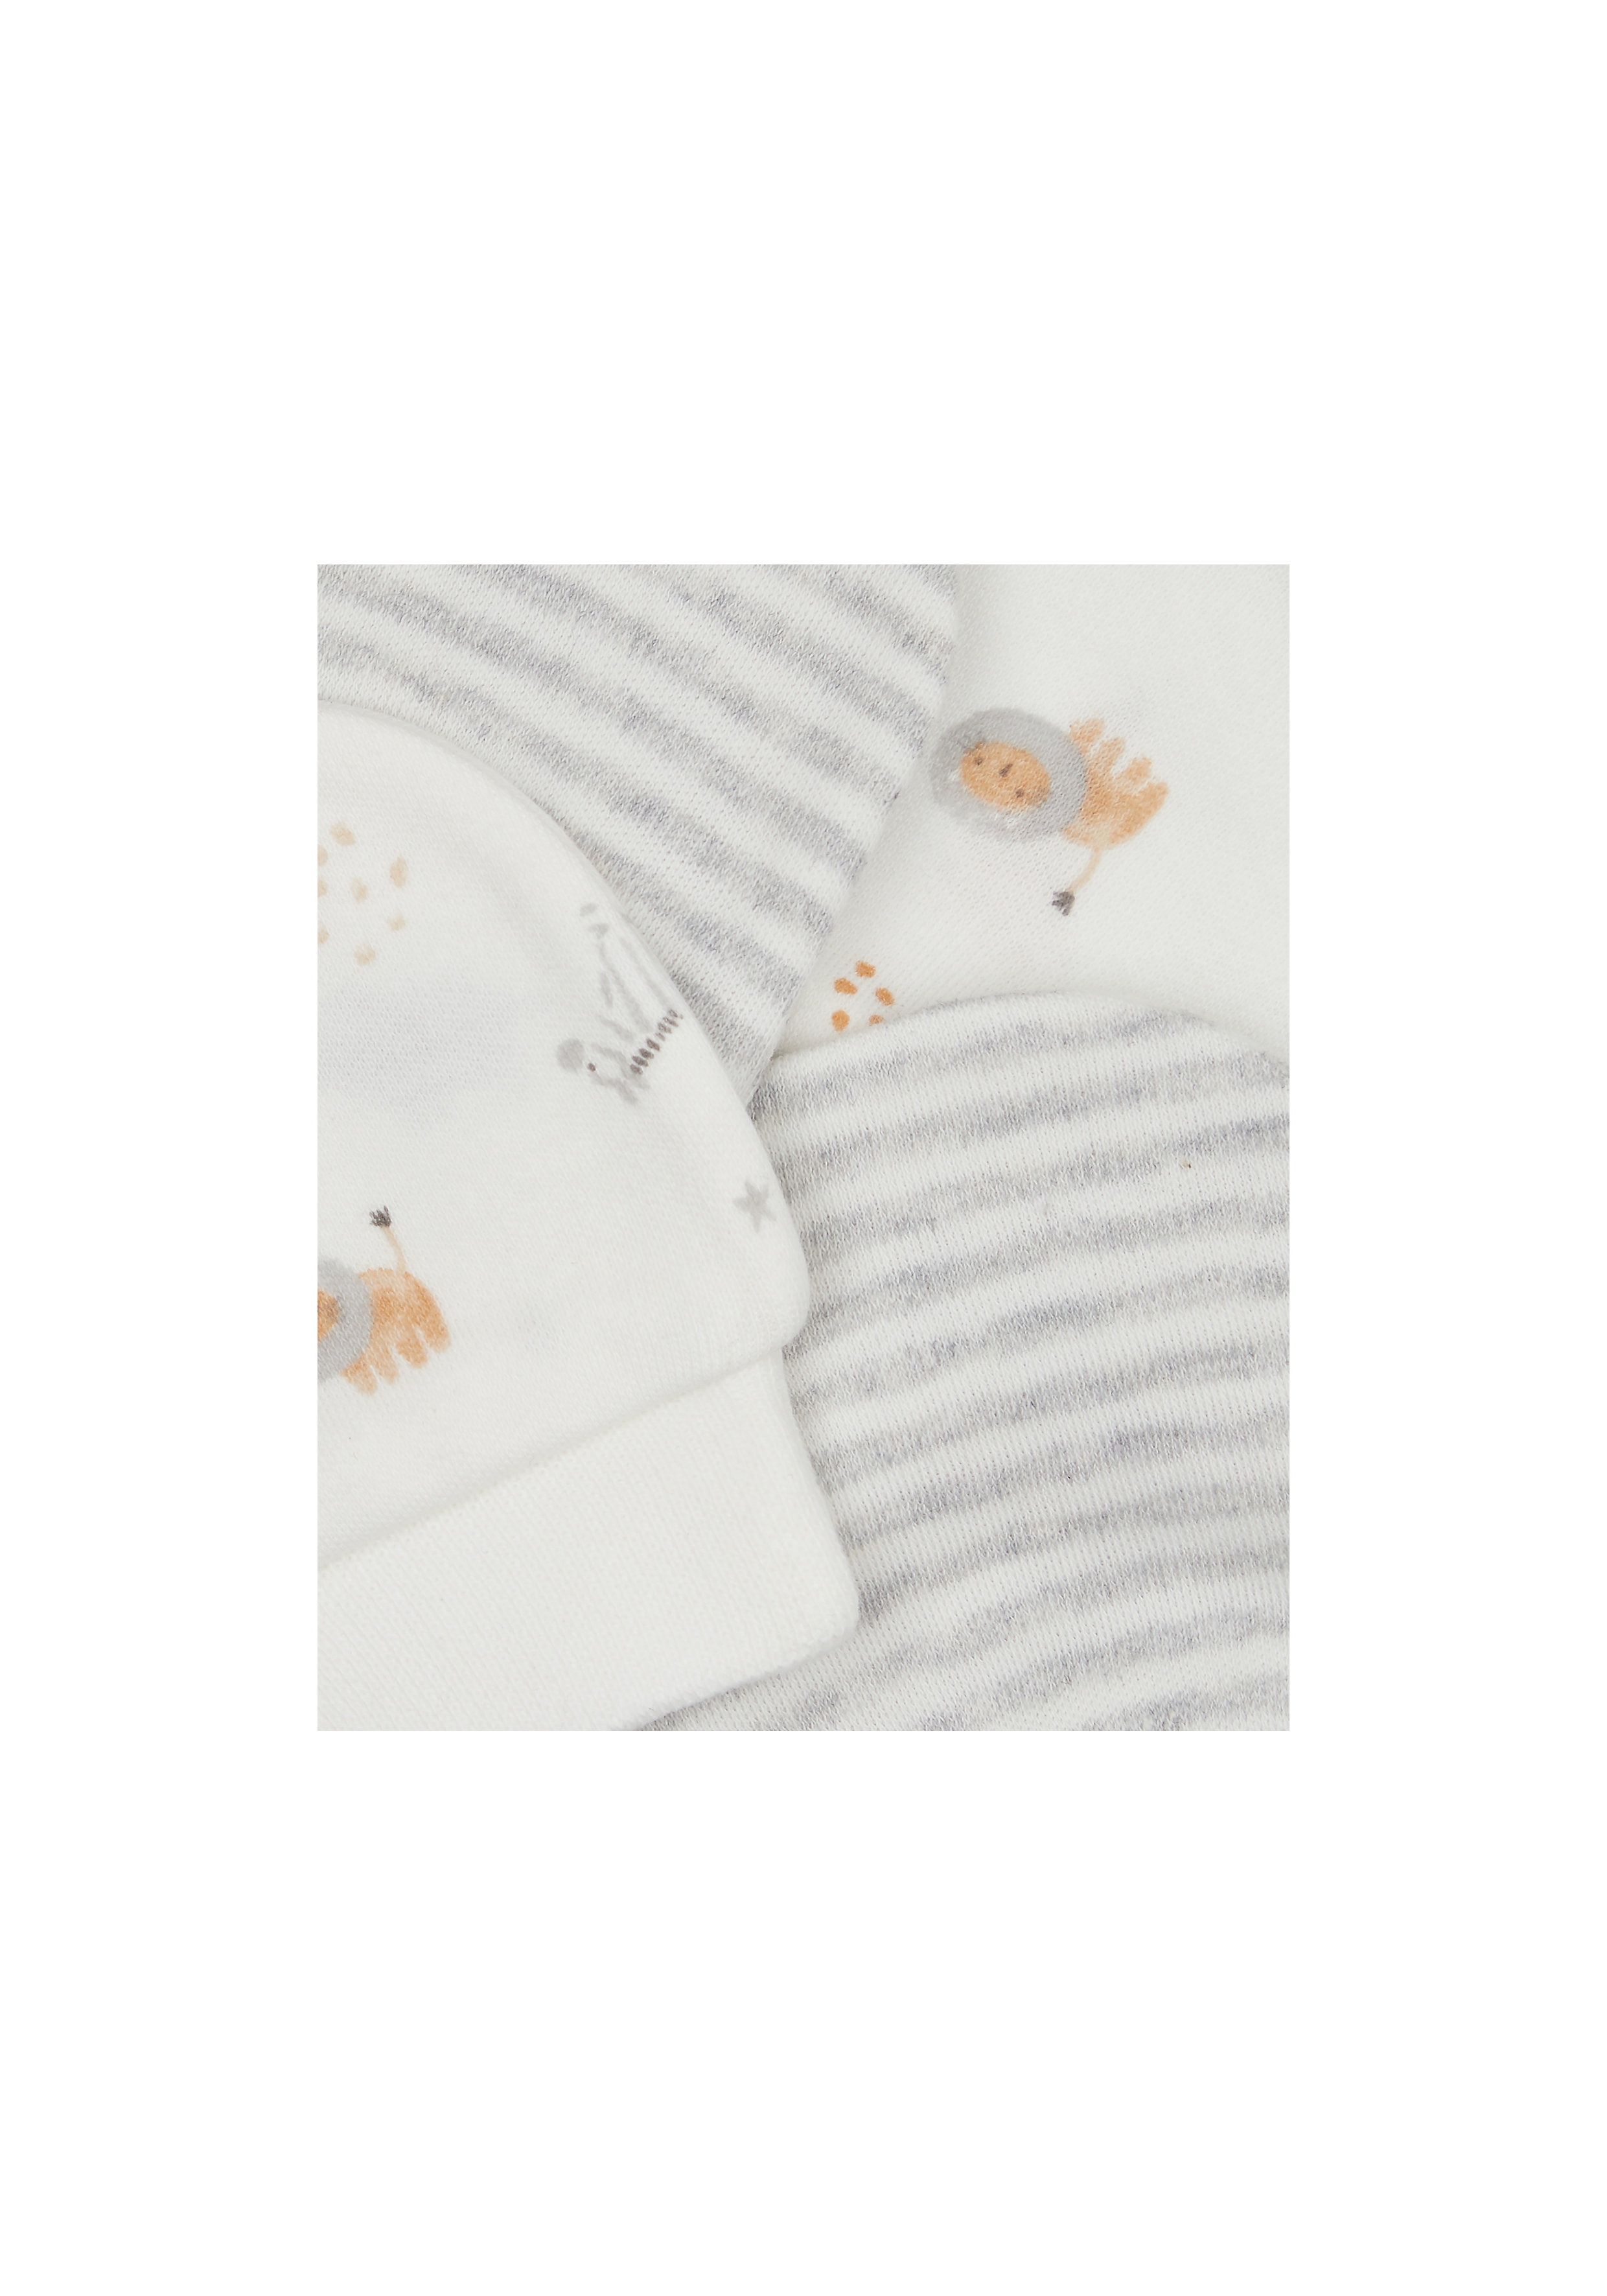 Mothercare | Unisex Mitts Striped And Printed - Pack Of 2 - Grey & White 1